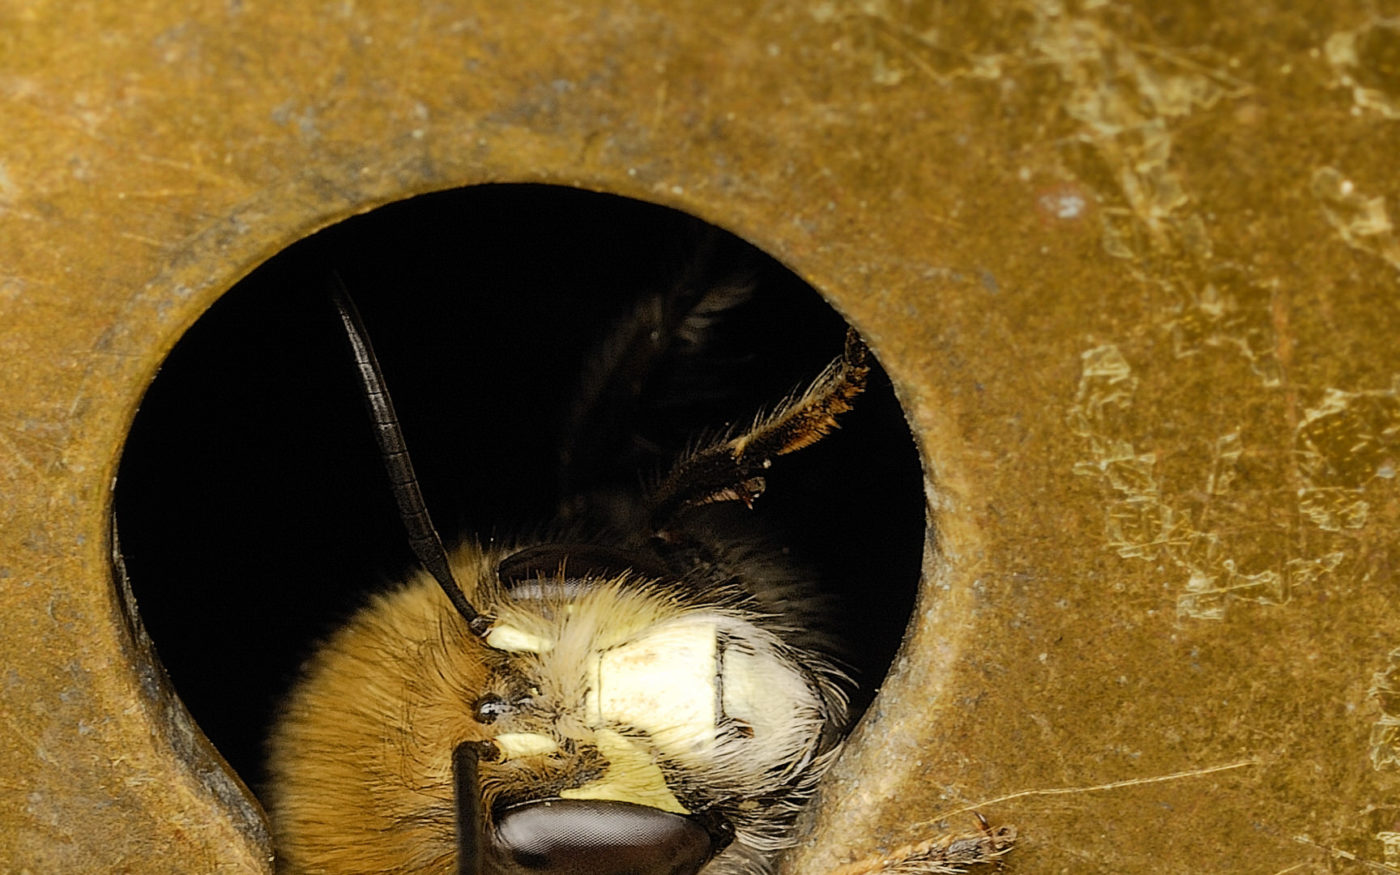 Hairy-footed flower bee, Anthophora plumipes, looking through the keyhole